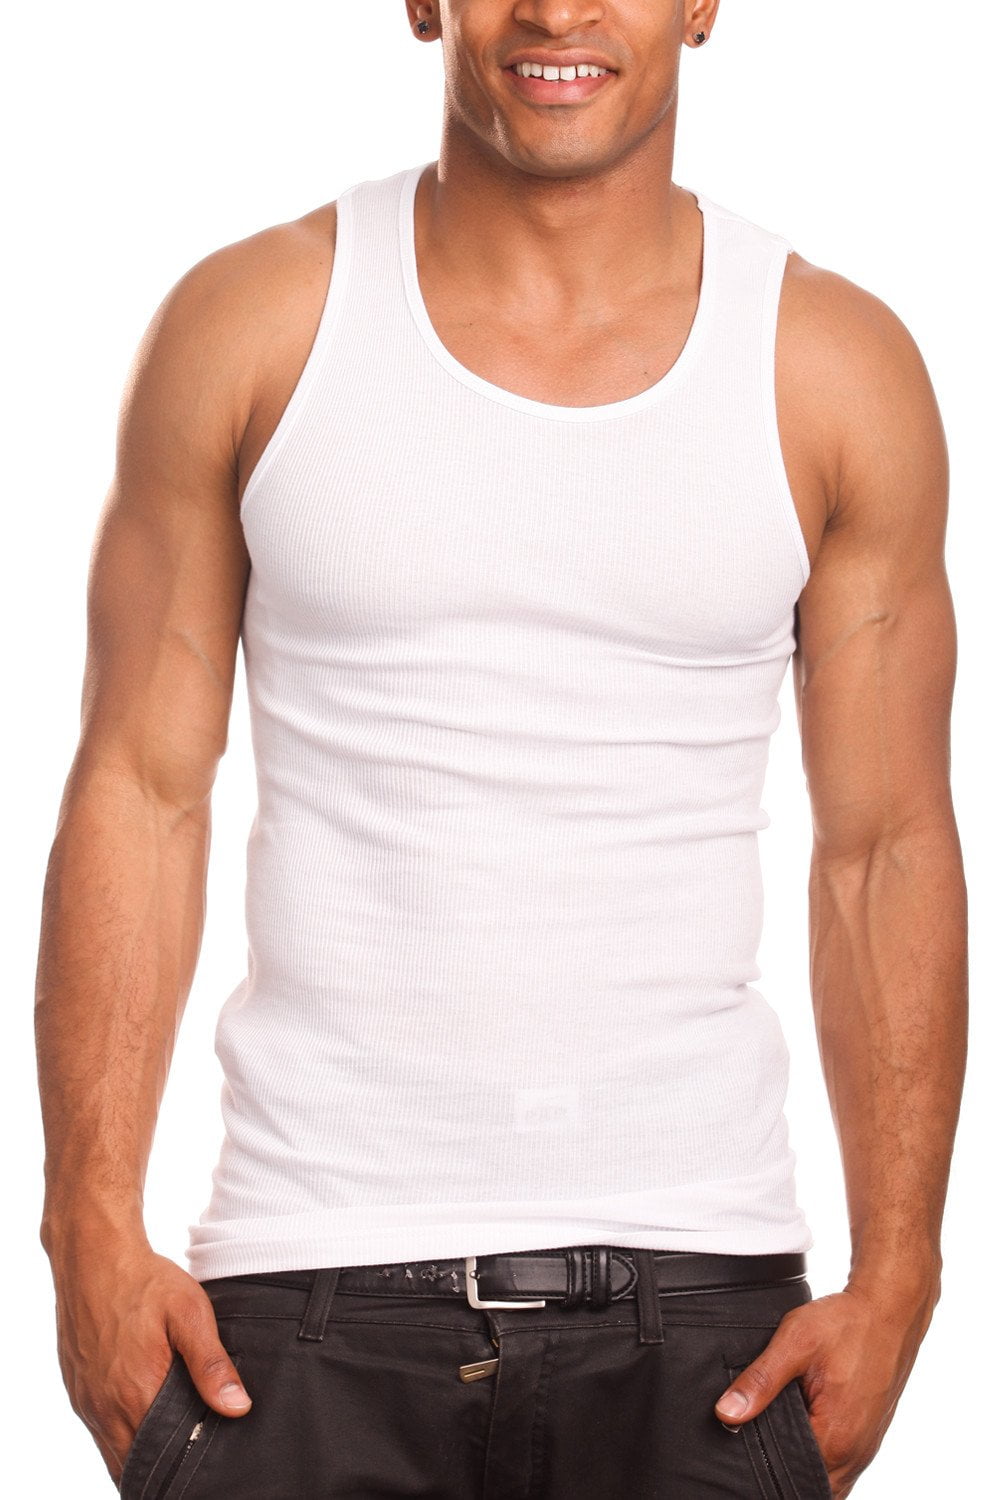 Why Are White Tank Tops Sometimes Called 'Wife-Beaters'?